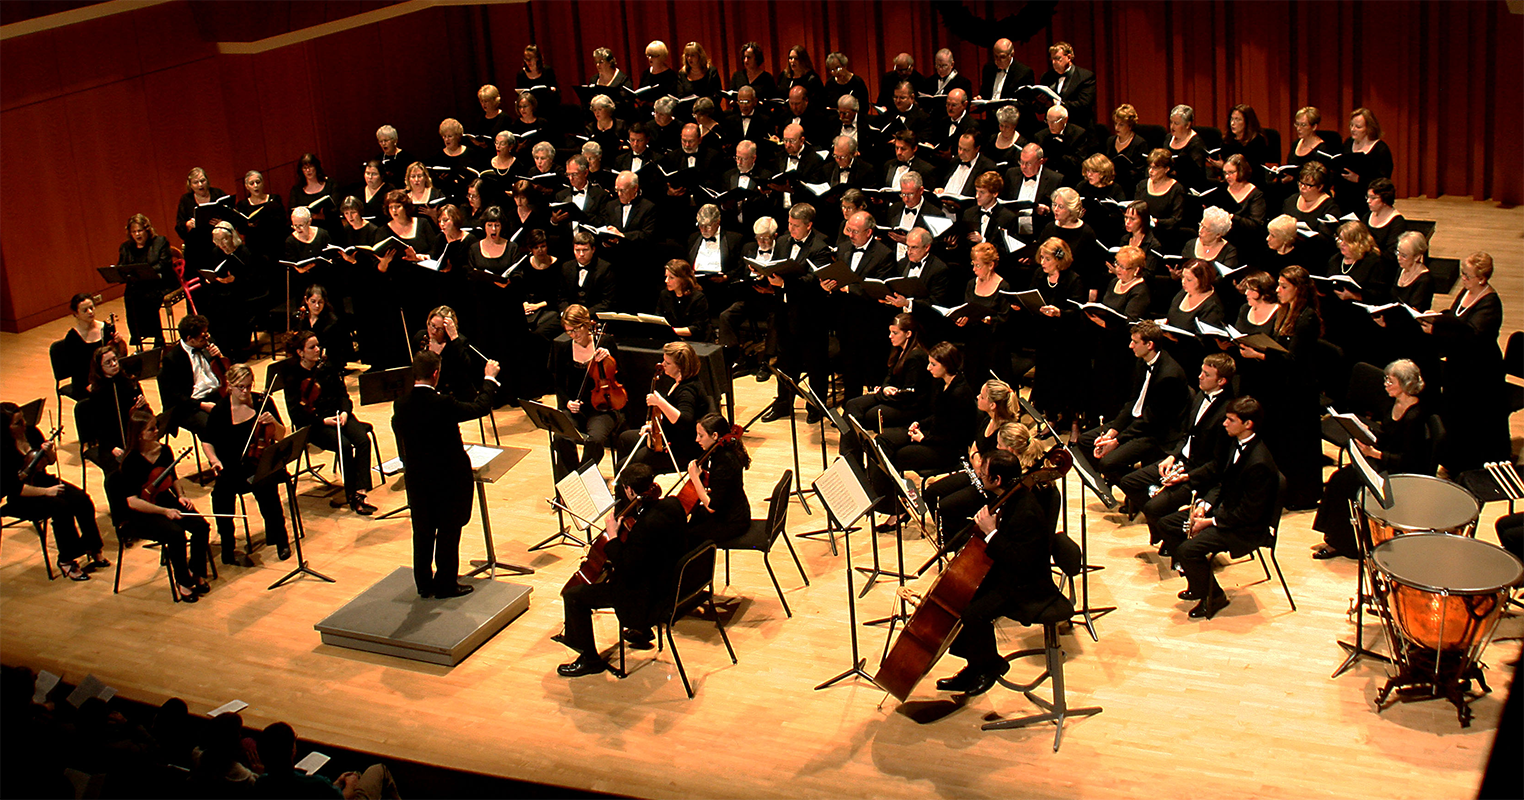 Athens Choral Society: “The Armed Man: A Mass for Peace”